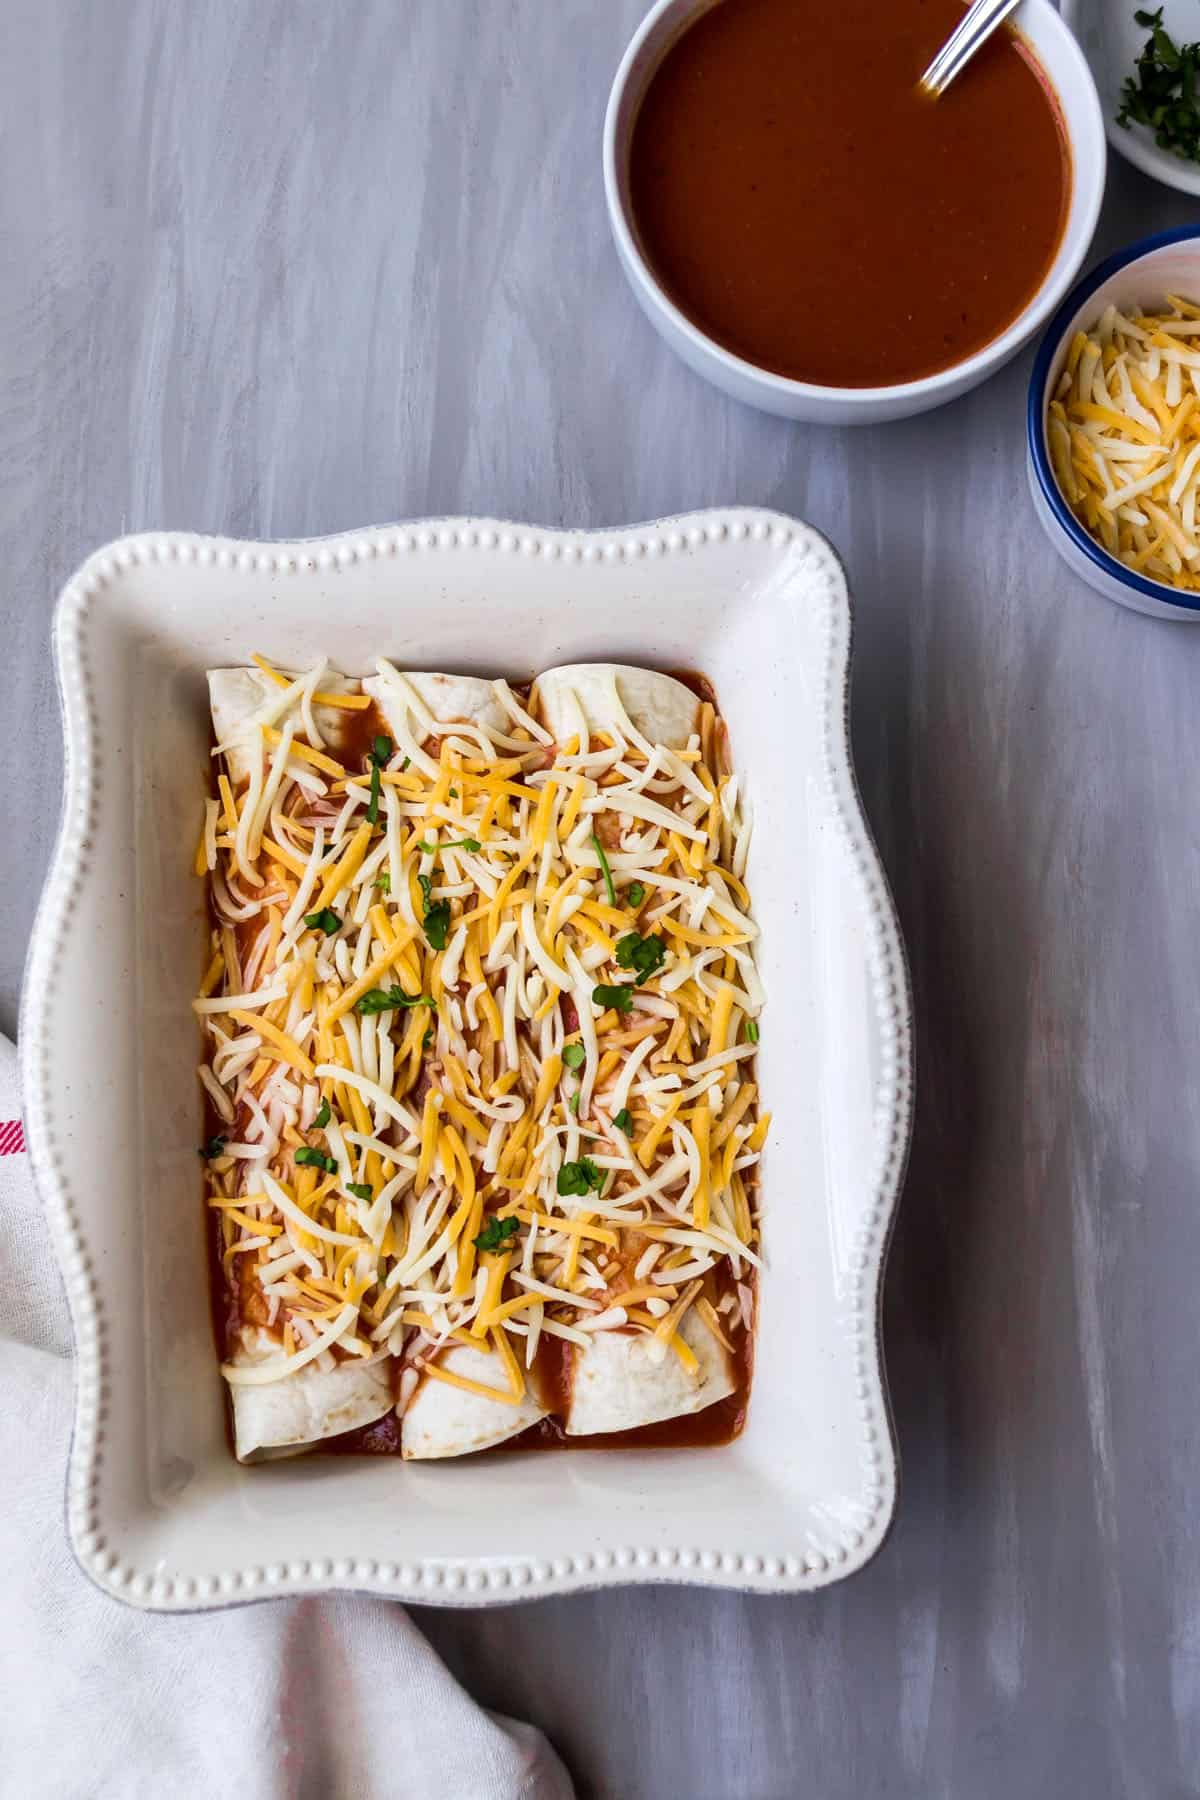 The enchiladas topped with shredded cheese before being baked